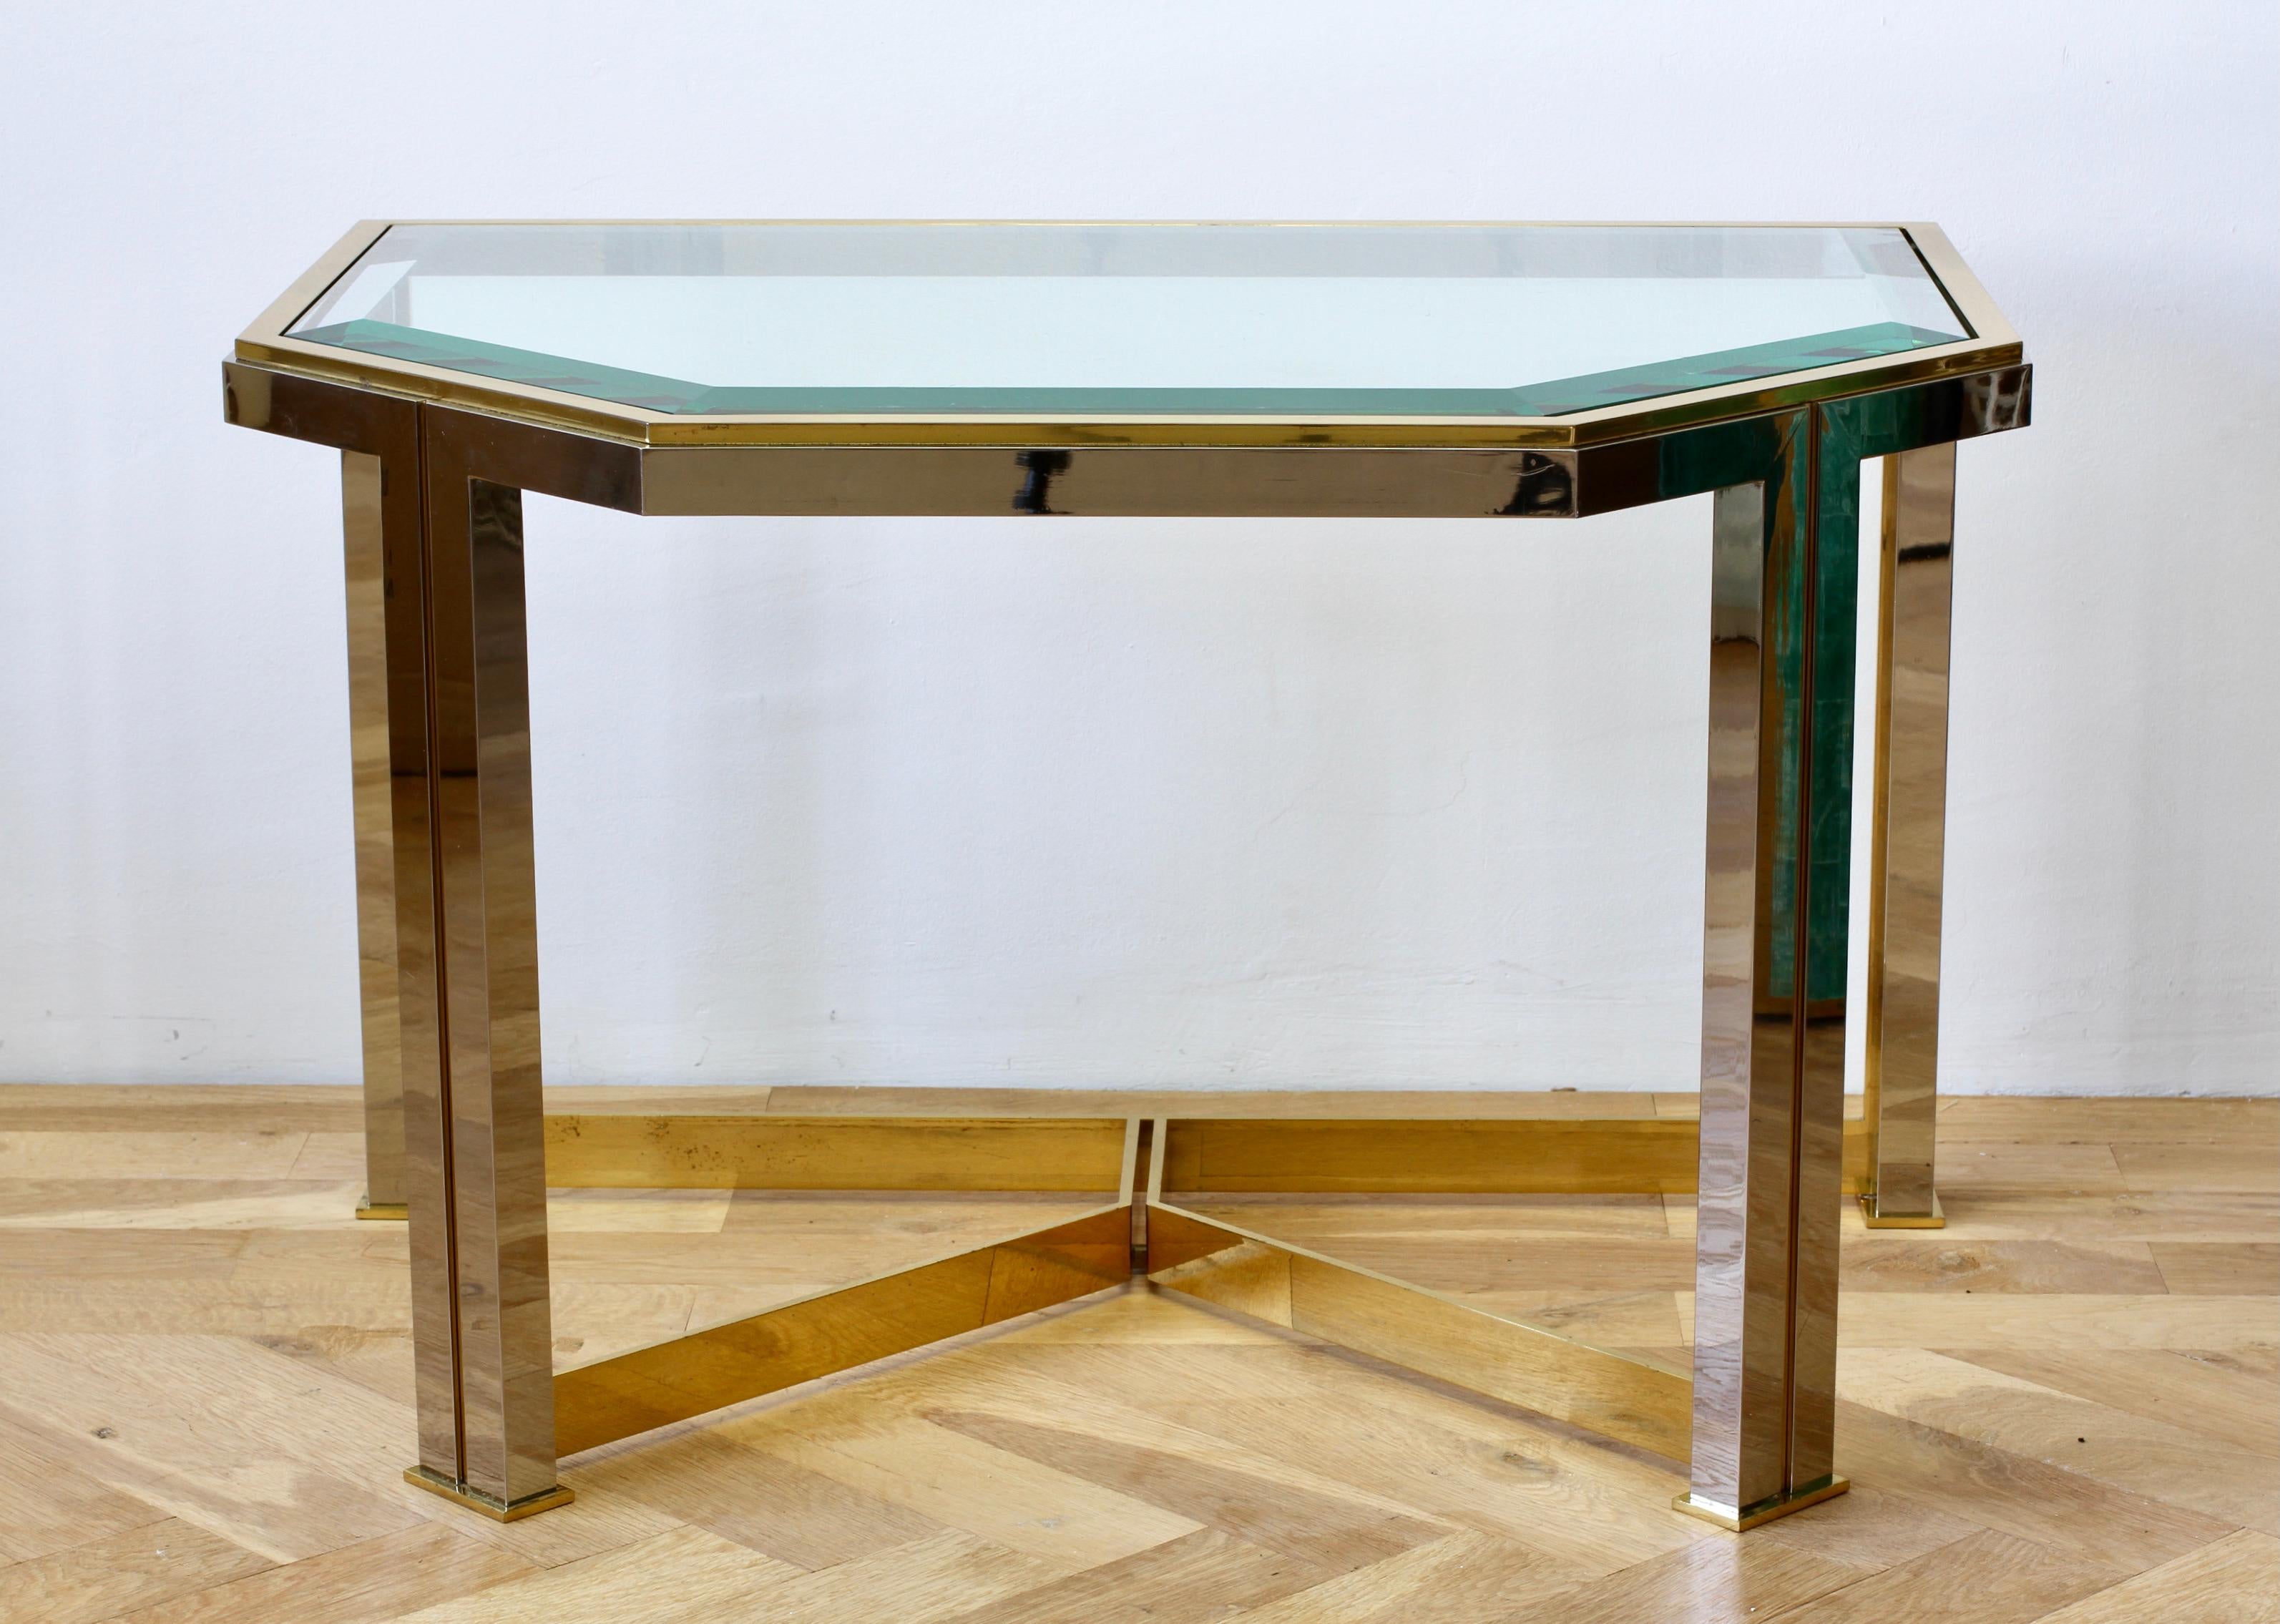 Stunning vintage midcentury angled polished brass and chrome-plated side or end table with beveled edged glass table top attributed to the Vereinigte Werkstätten München, circa 1970s. Perfect for the Hollywood Regency style enthusiast or midcentury